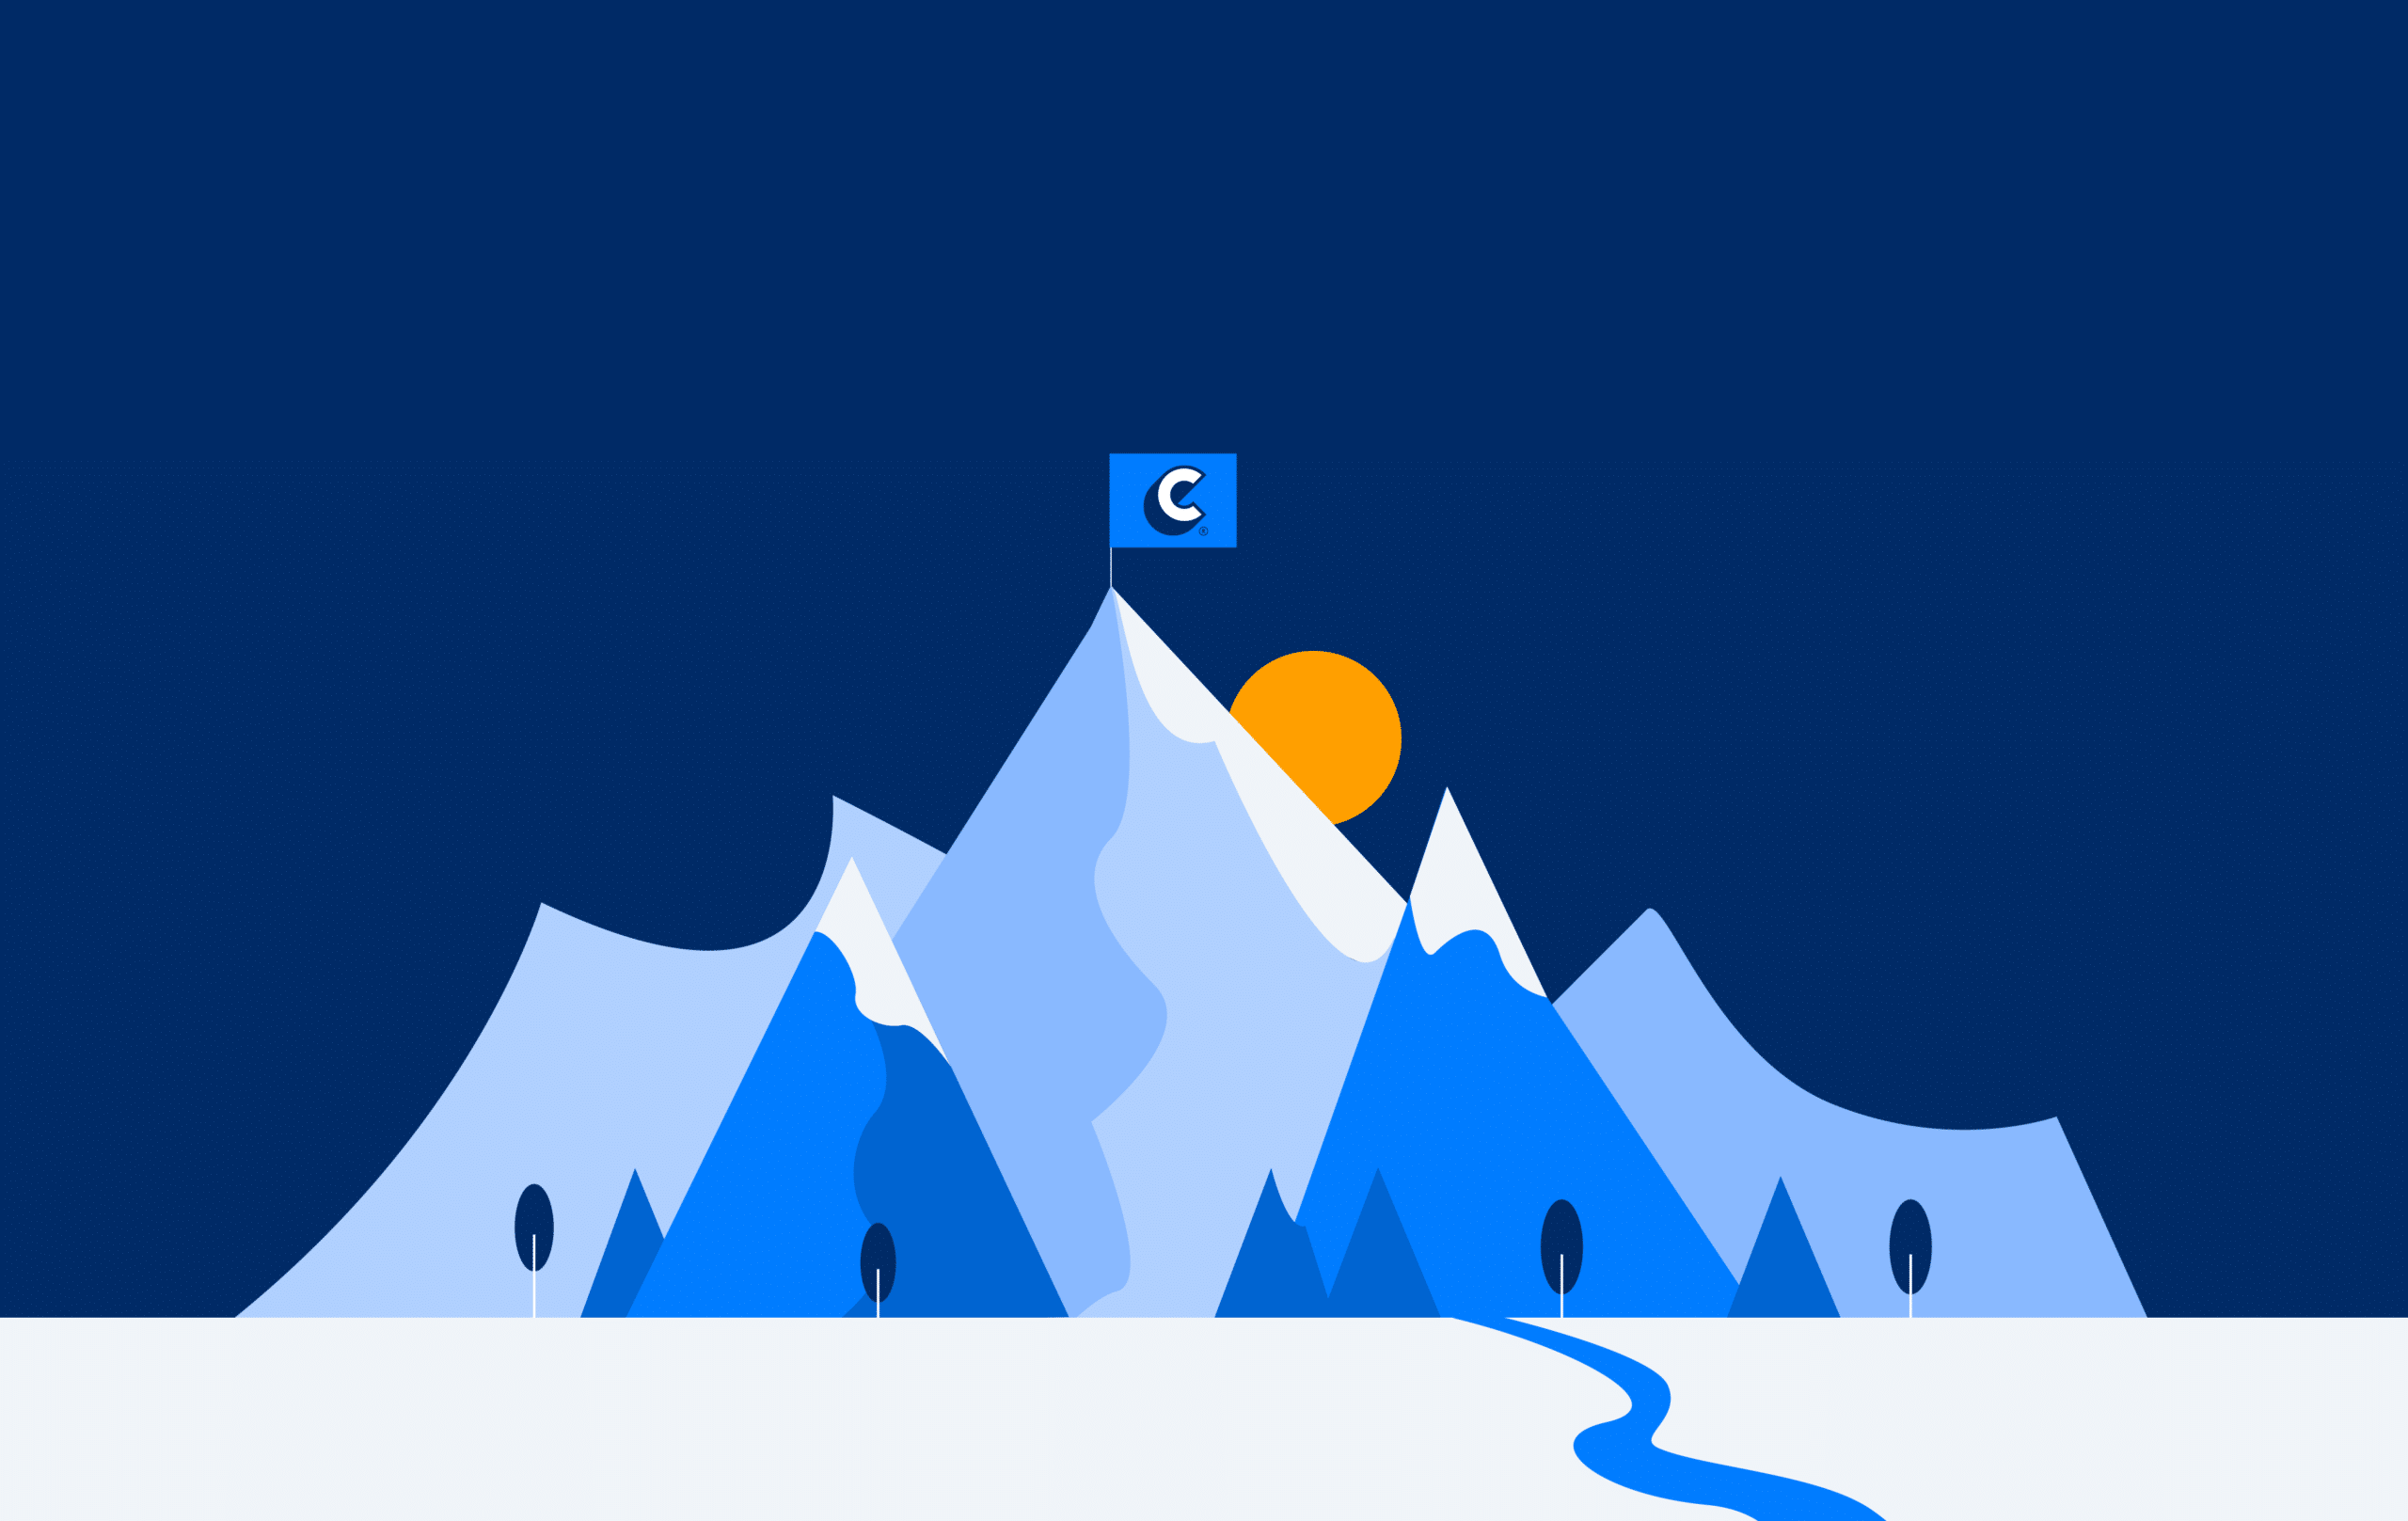 an illustration of a mountain with a Capacity branded flag at the peak